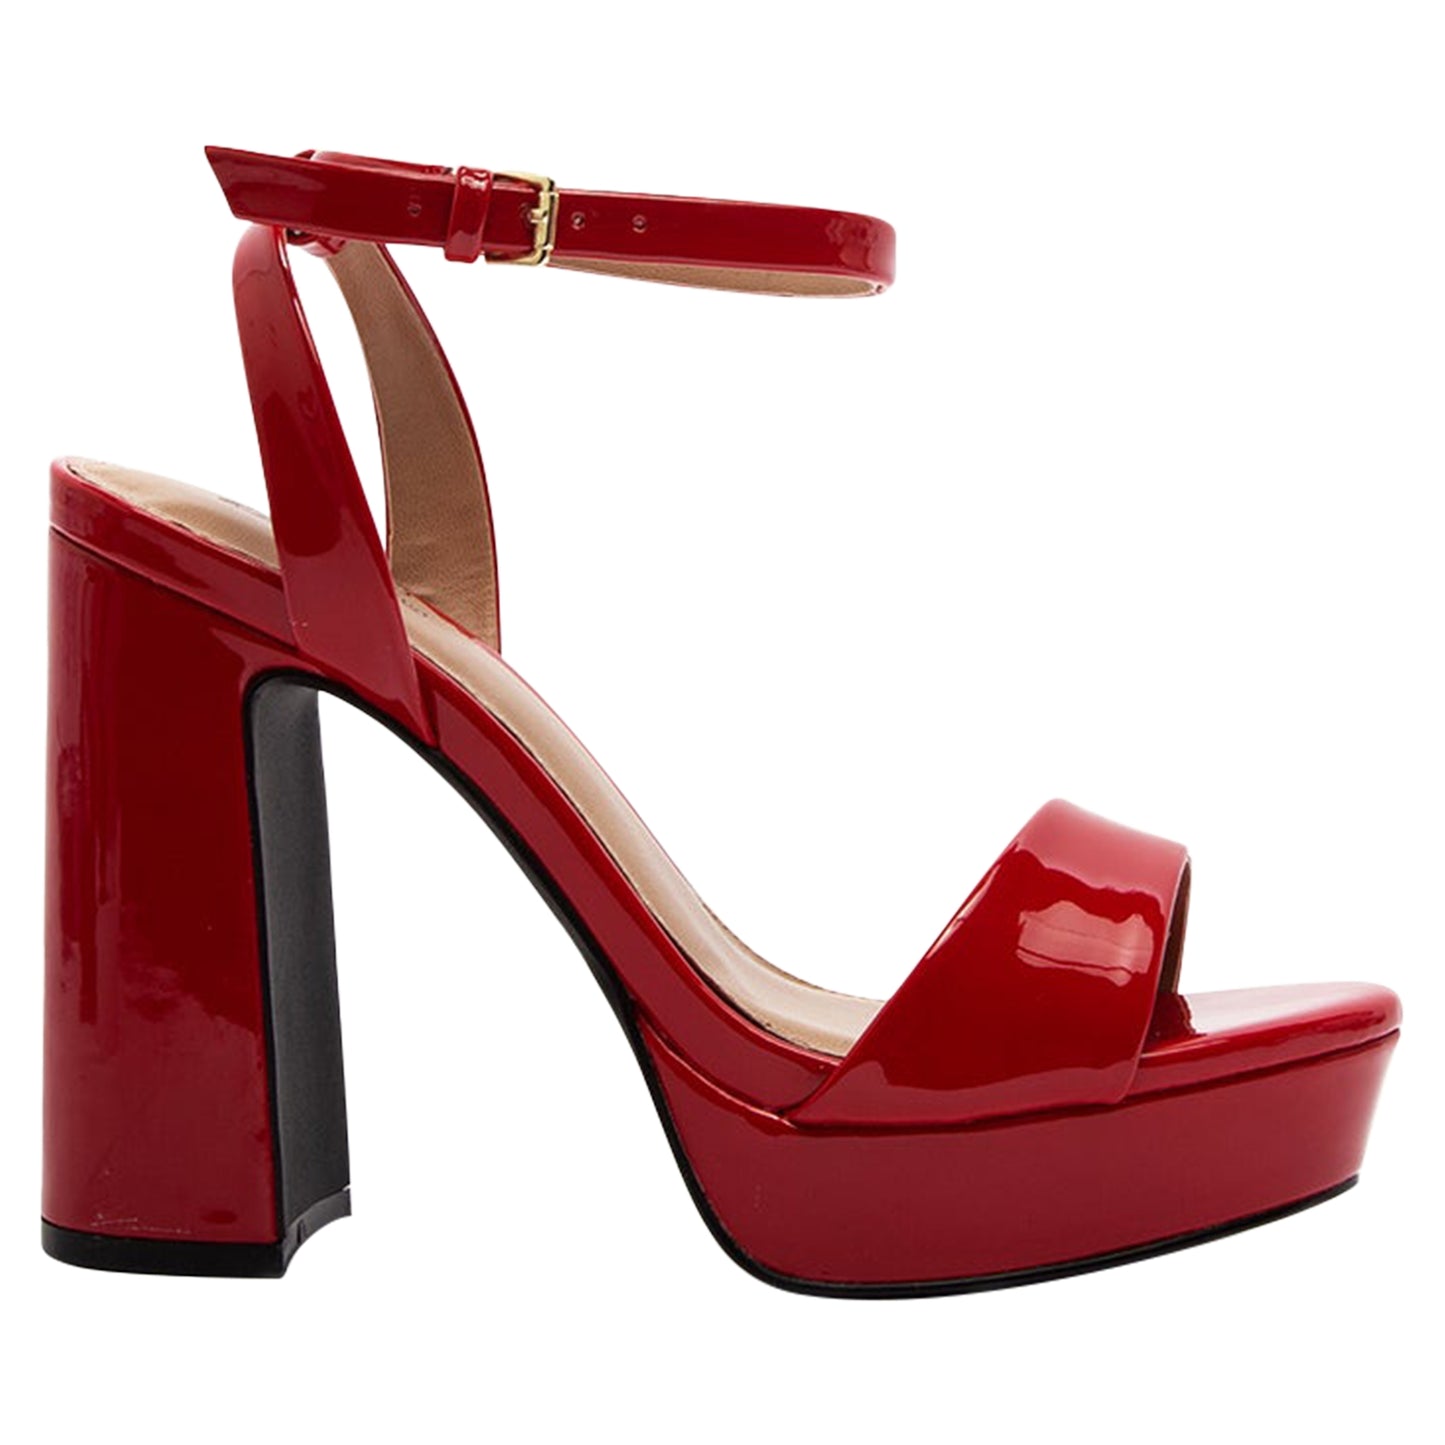 Women's Chunky Block Heel Sandals Ankle Strap Red